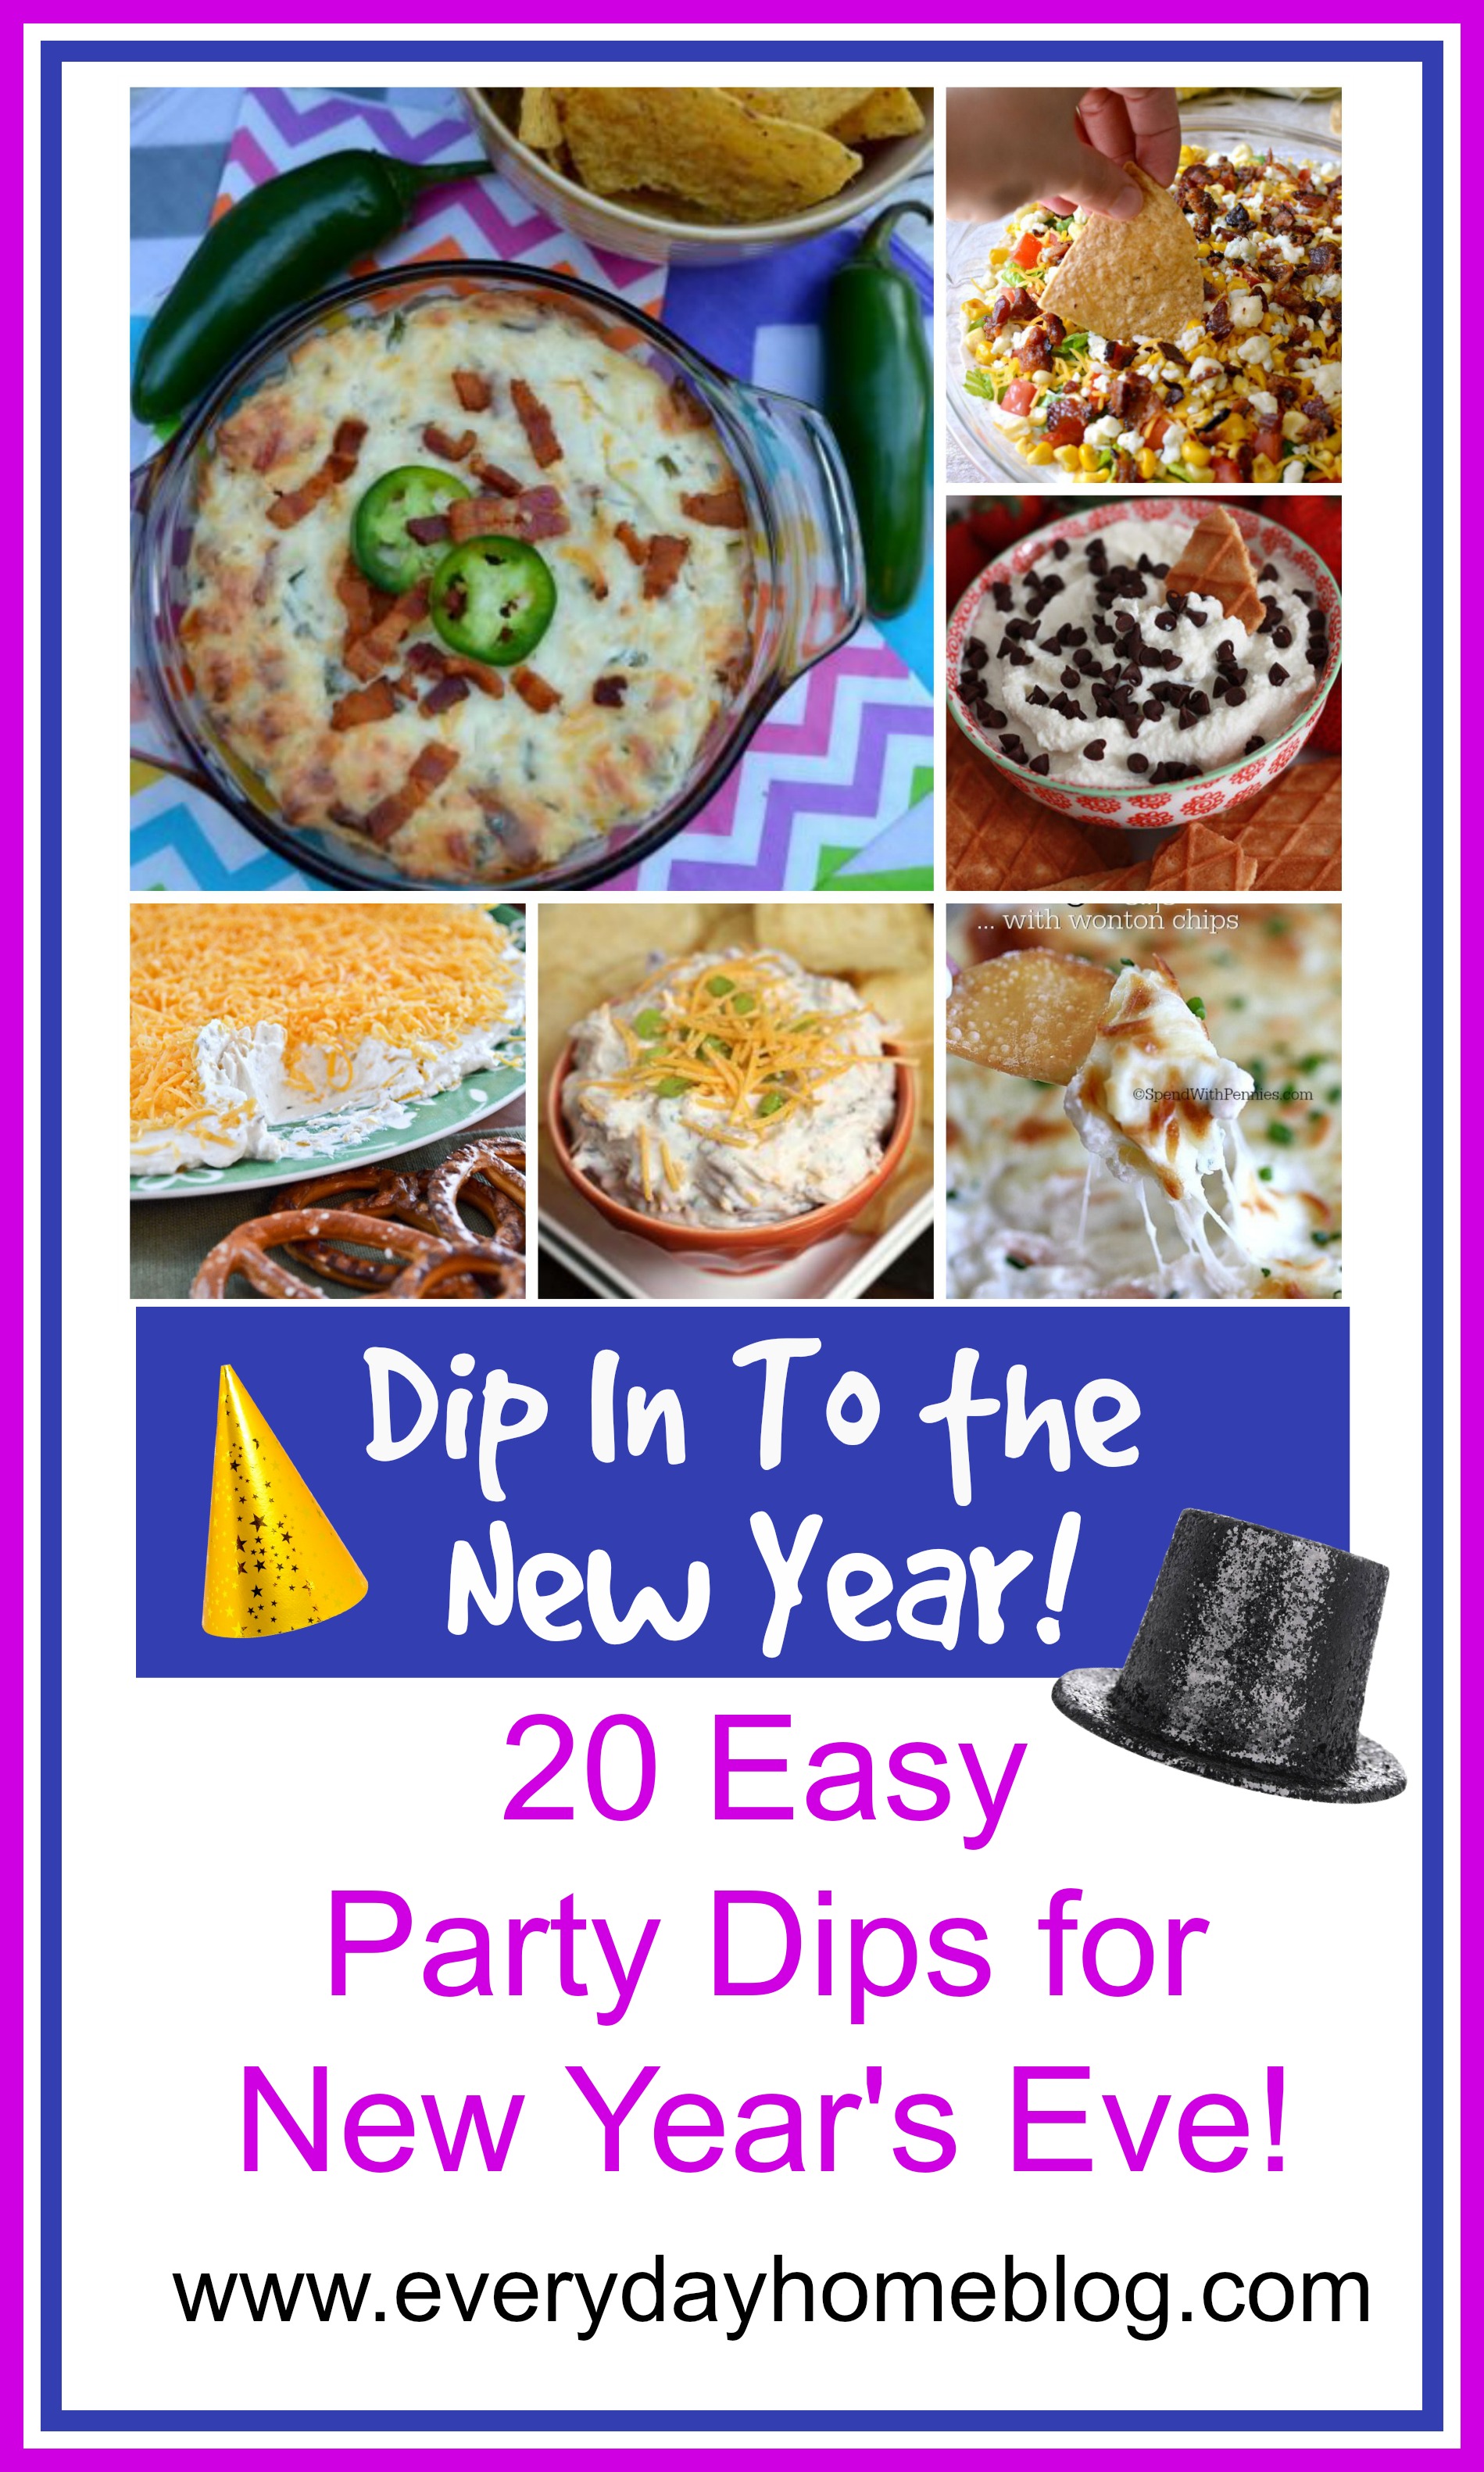 20 Great Dips for New Years by The Everyday Home